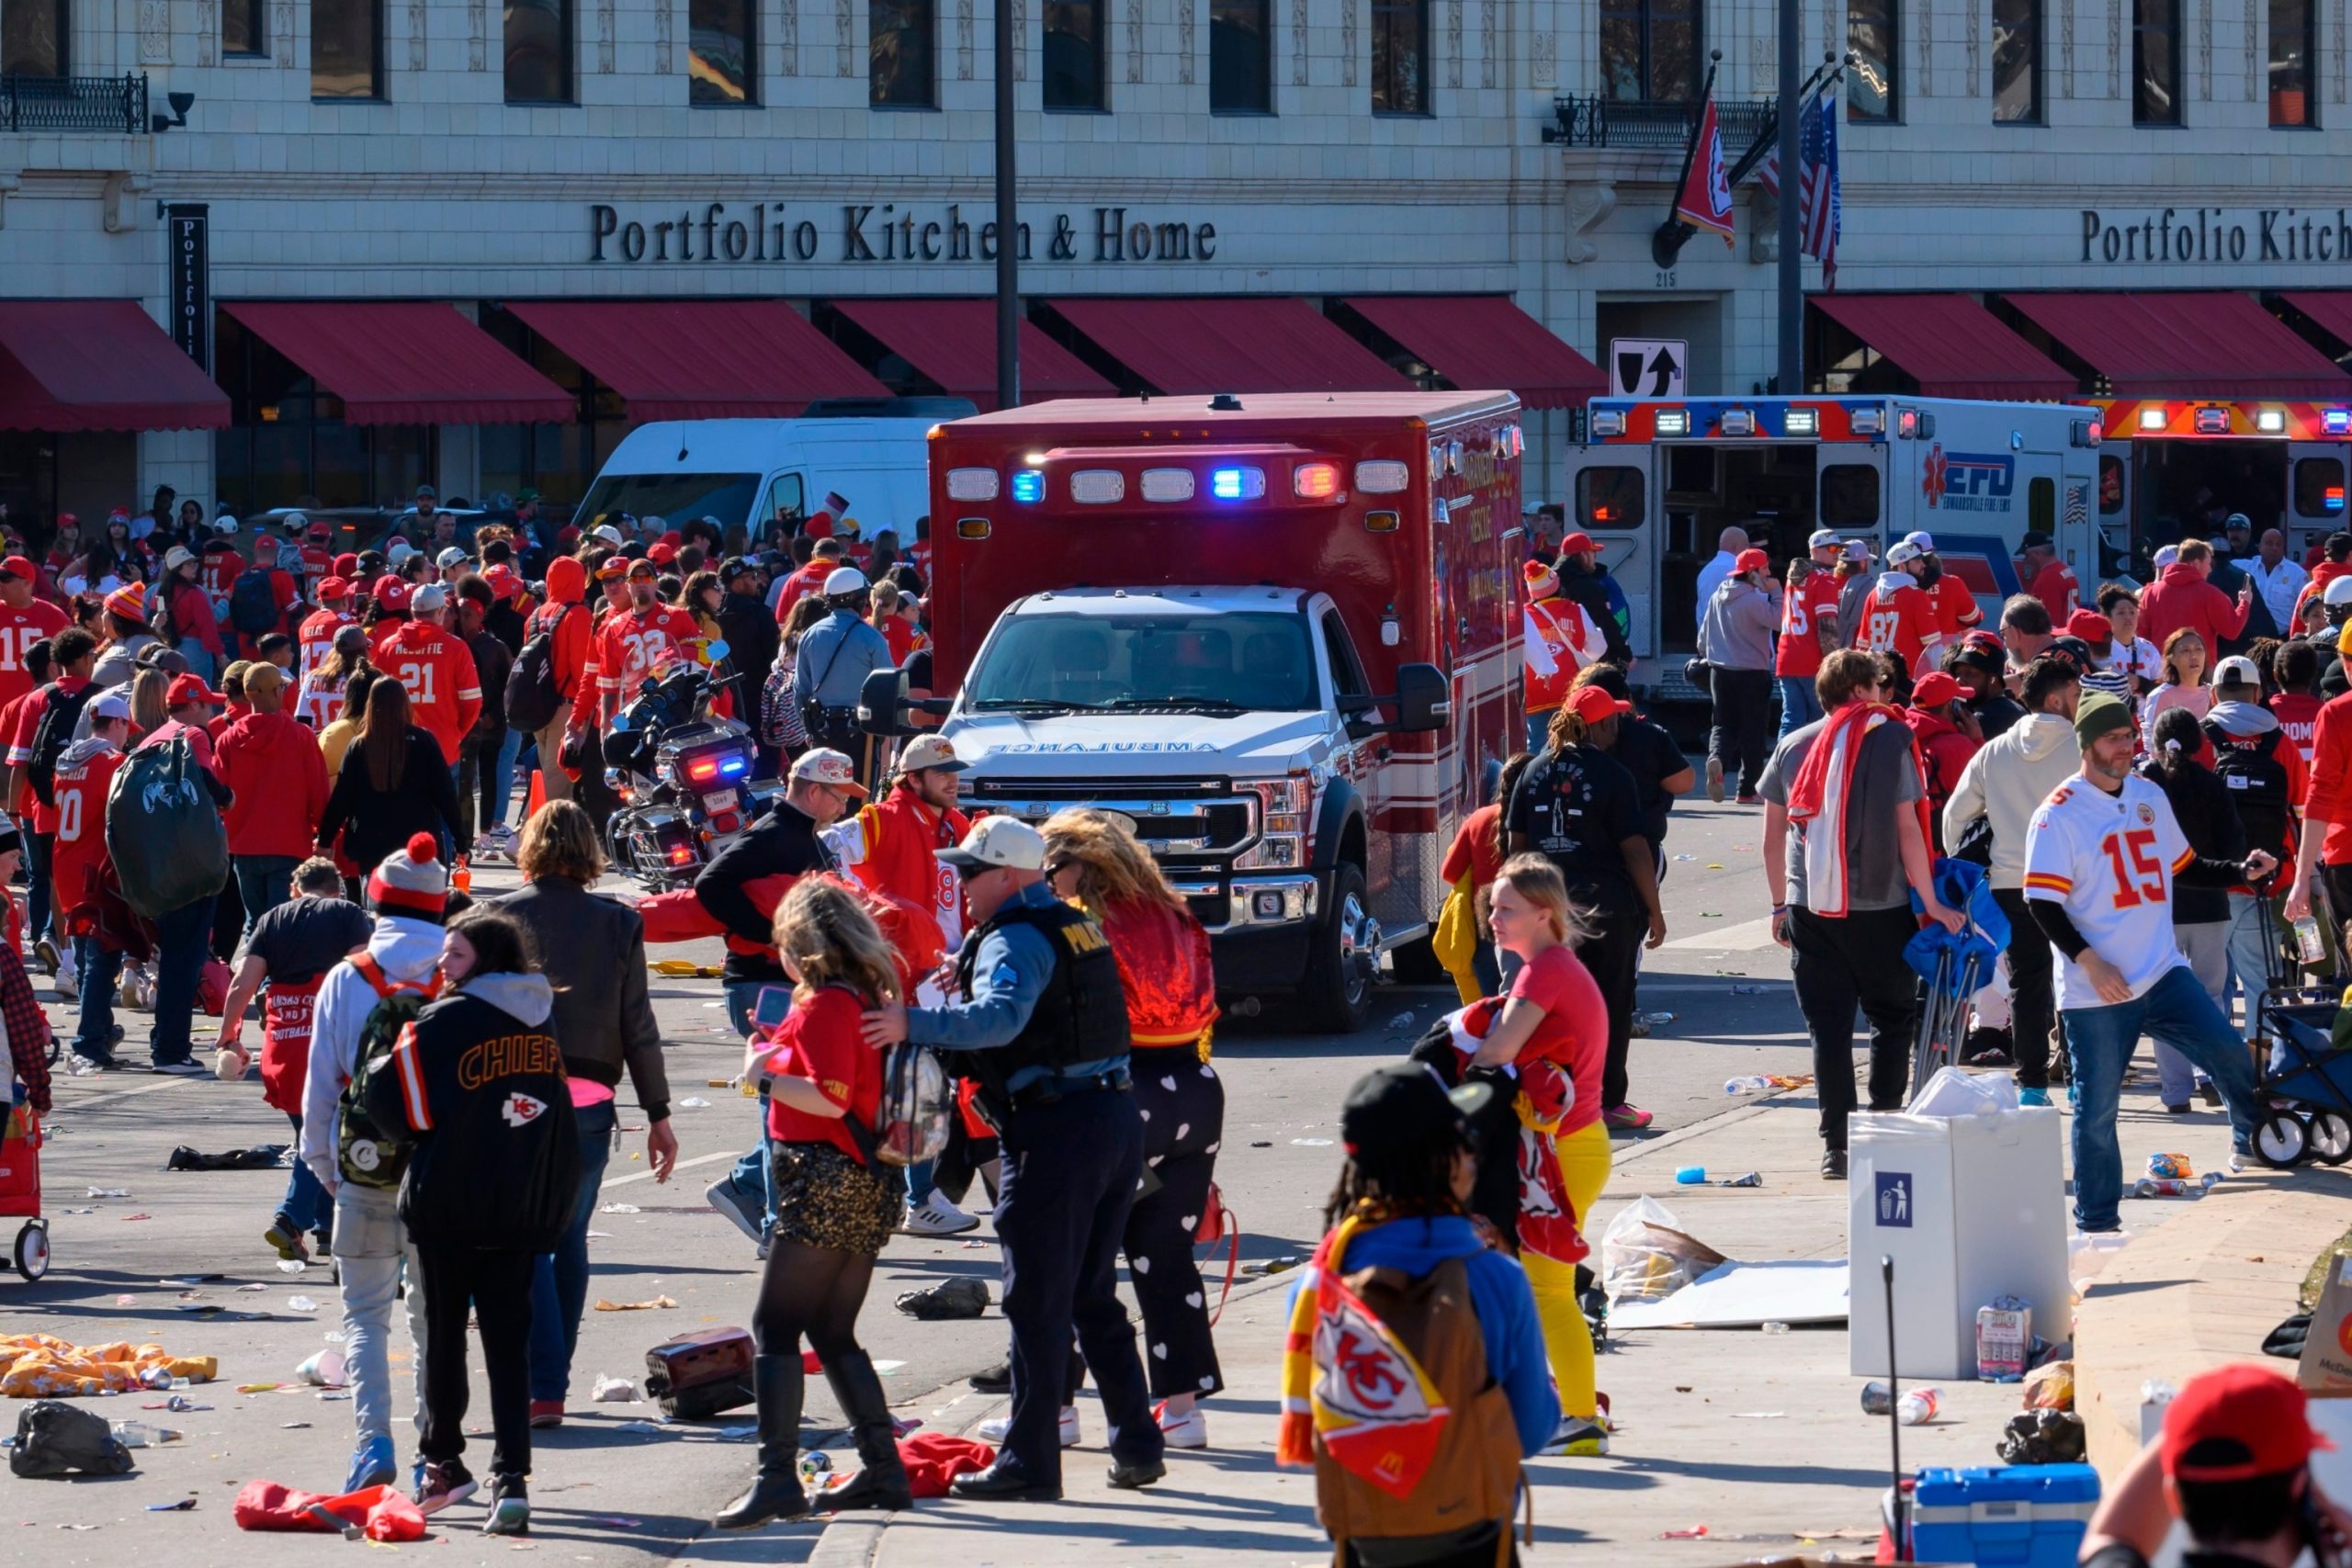 Trey Smith, Kansas City Chiefs player, shares his reaction to parade shooting and recounts his heroic act of helping a boy.